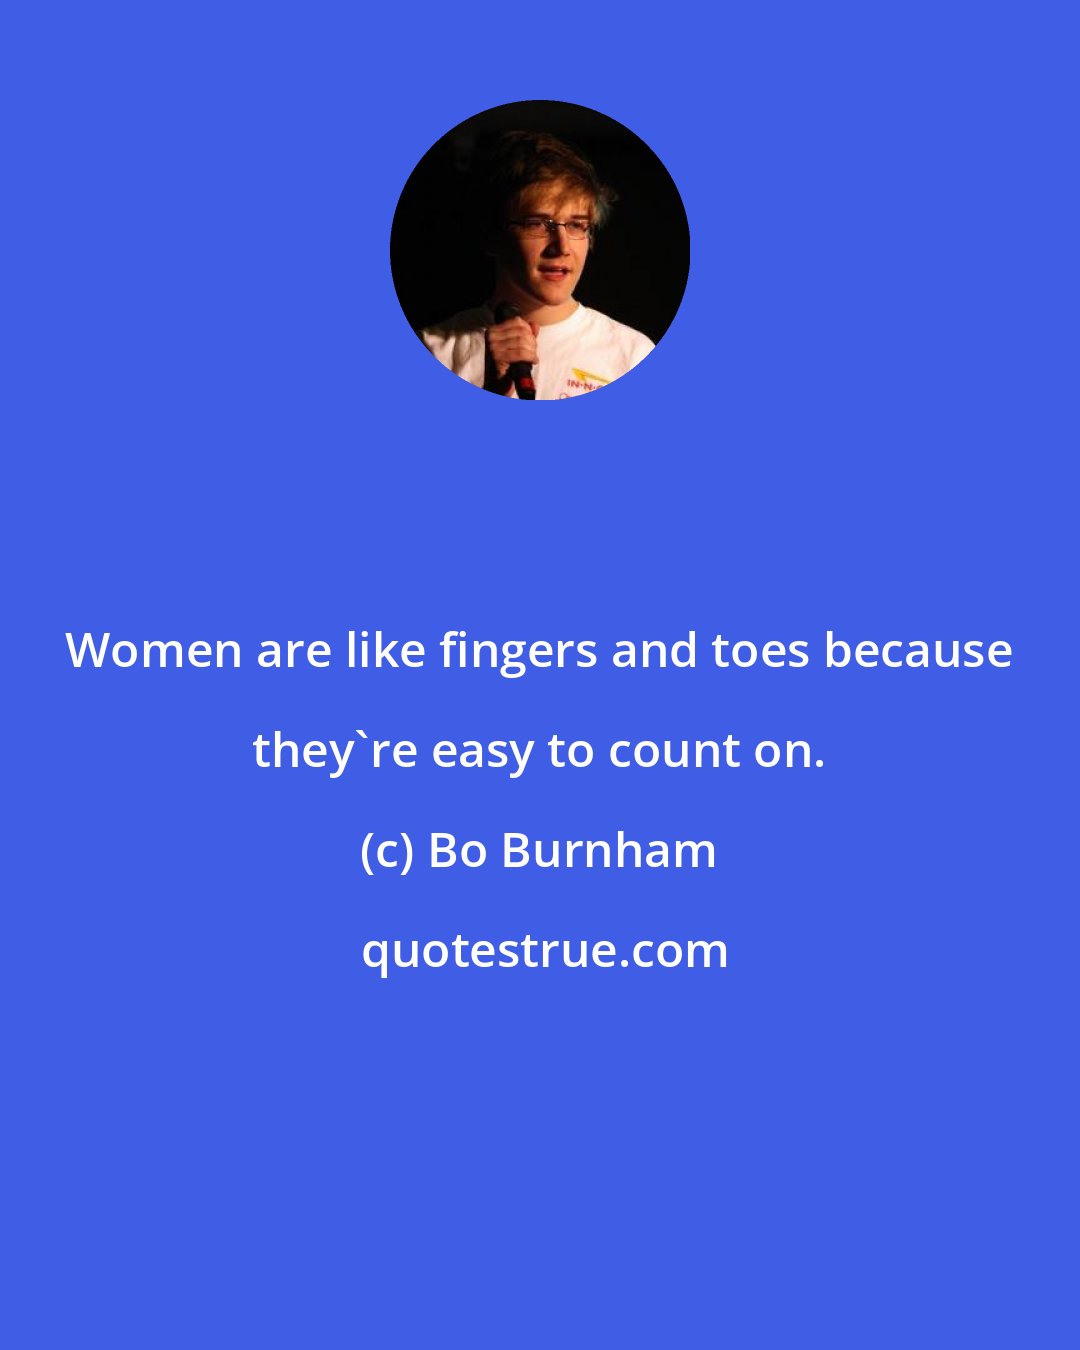 Bo Burnham: Women are like fingers and toes because they're easy to count on.